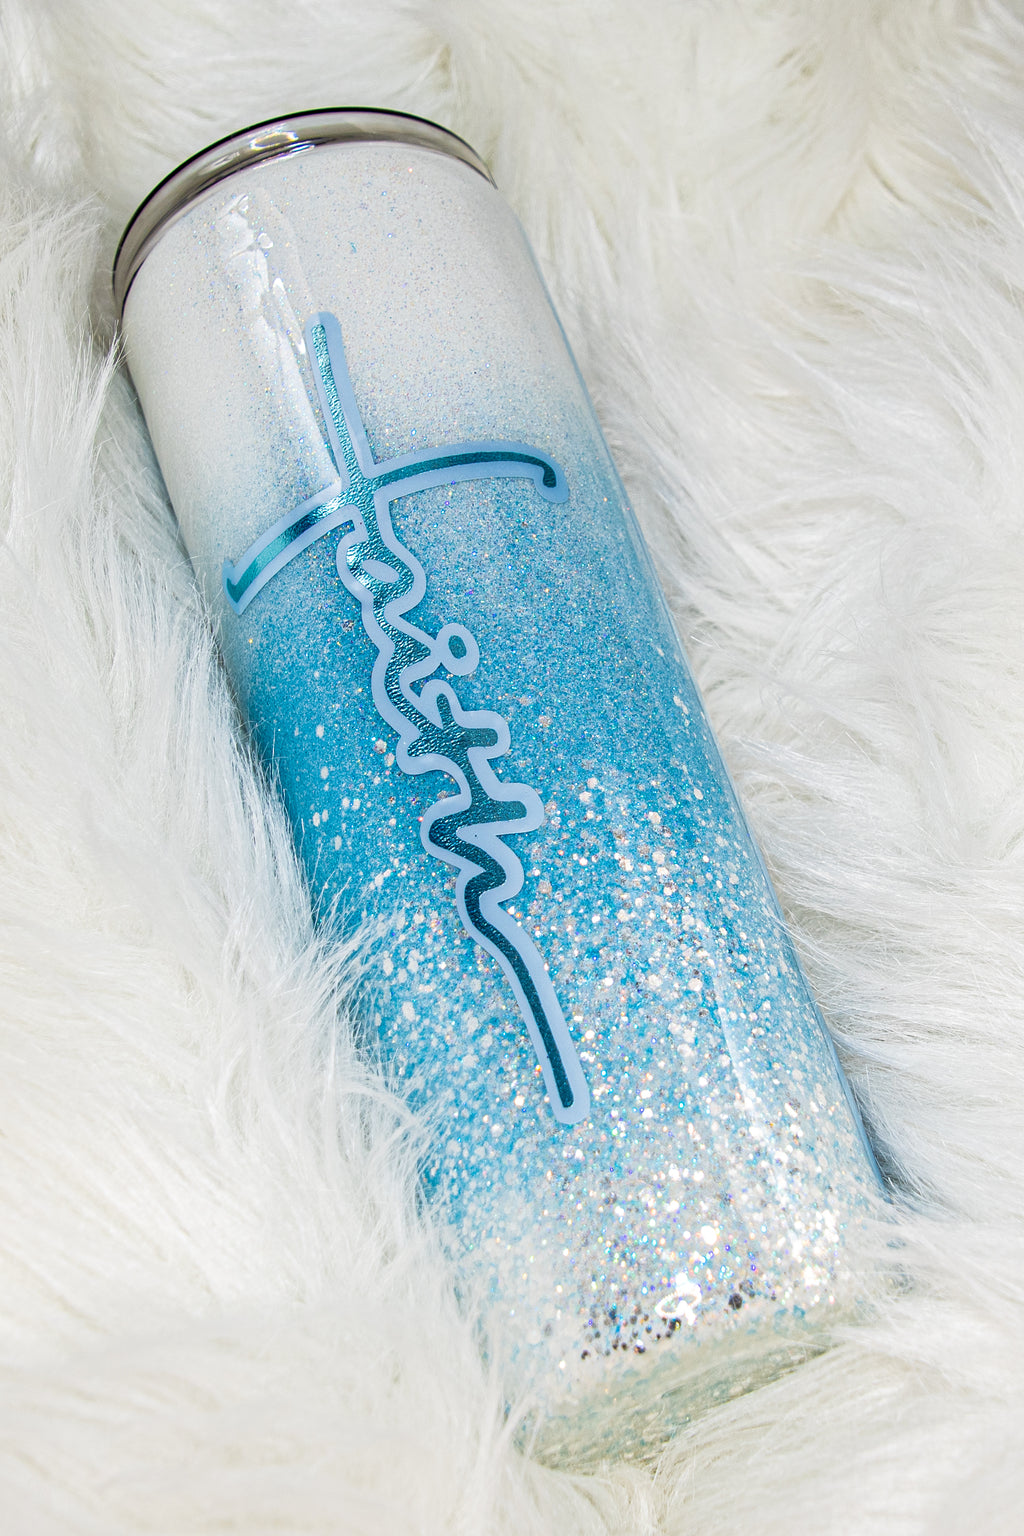 Floral Blue Glittered Faith Ombre ~ 30 Ounce Stainless Steel Tumbler